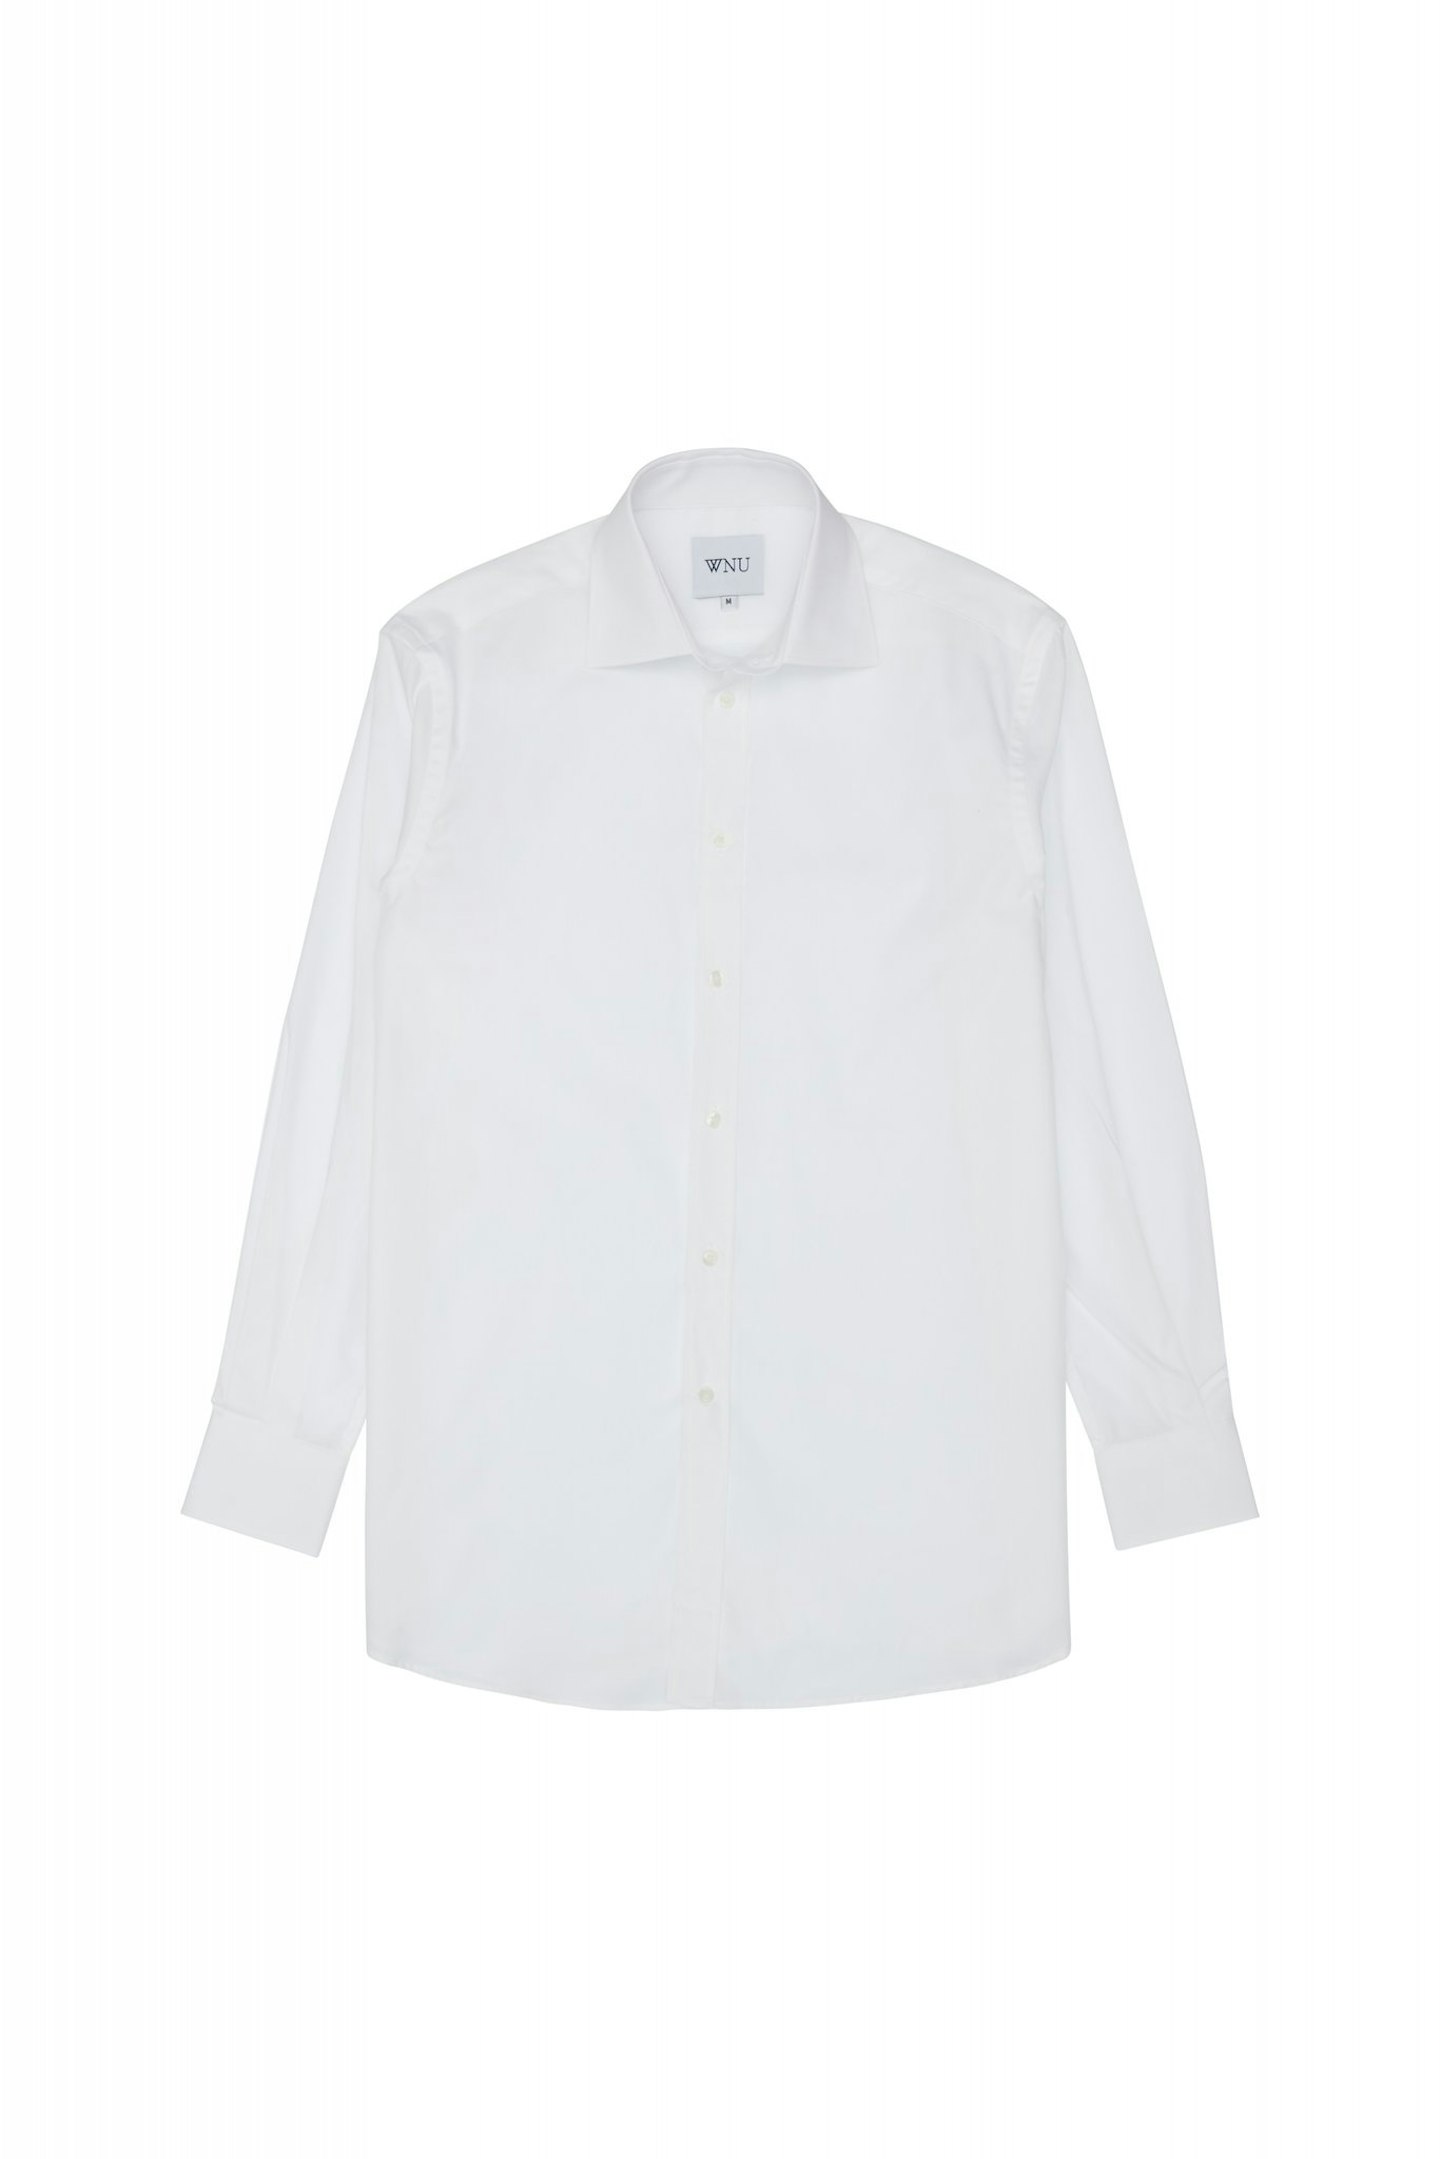 With Nothing Underneath, White Poplin Shirt, £80